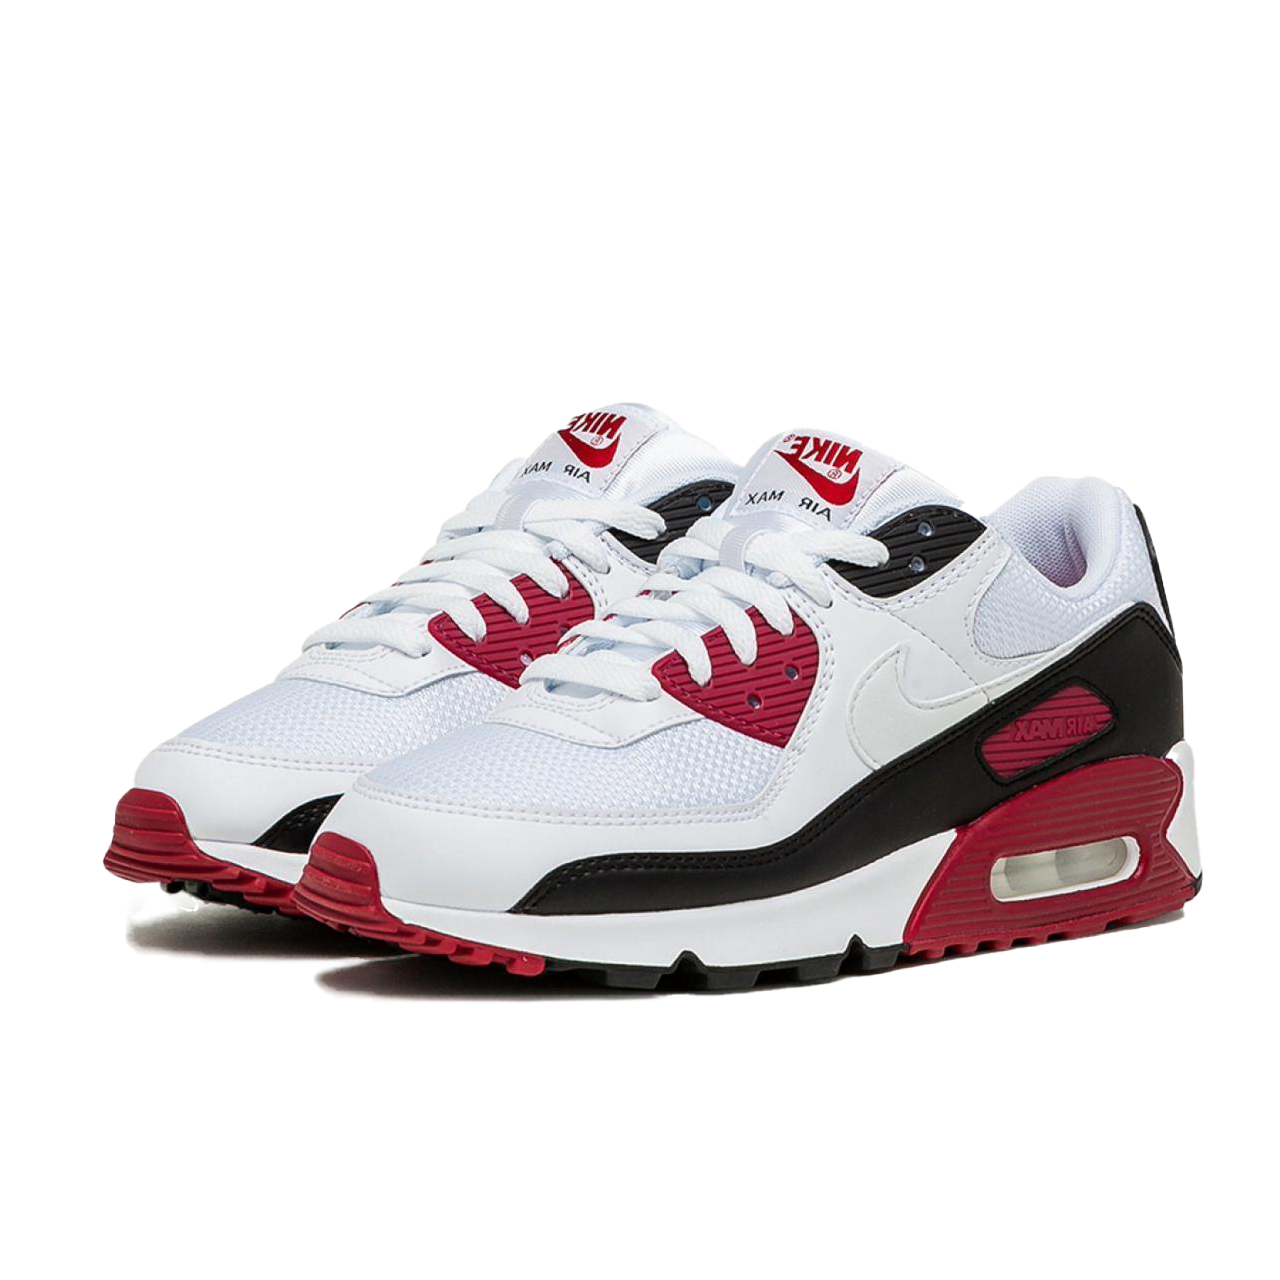 https://admin.thegioigiay.com/upload/product/2022/11/giay-the-thao-nike-air-max-90-recraft-new-maroon-size-38-5-6371c8d46bf5e-14112022114924.png